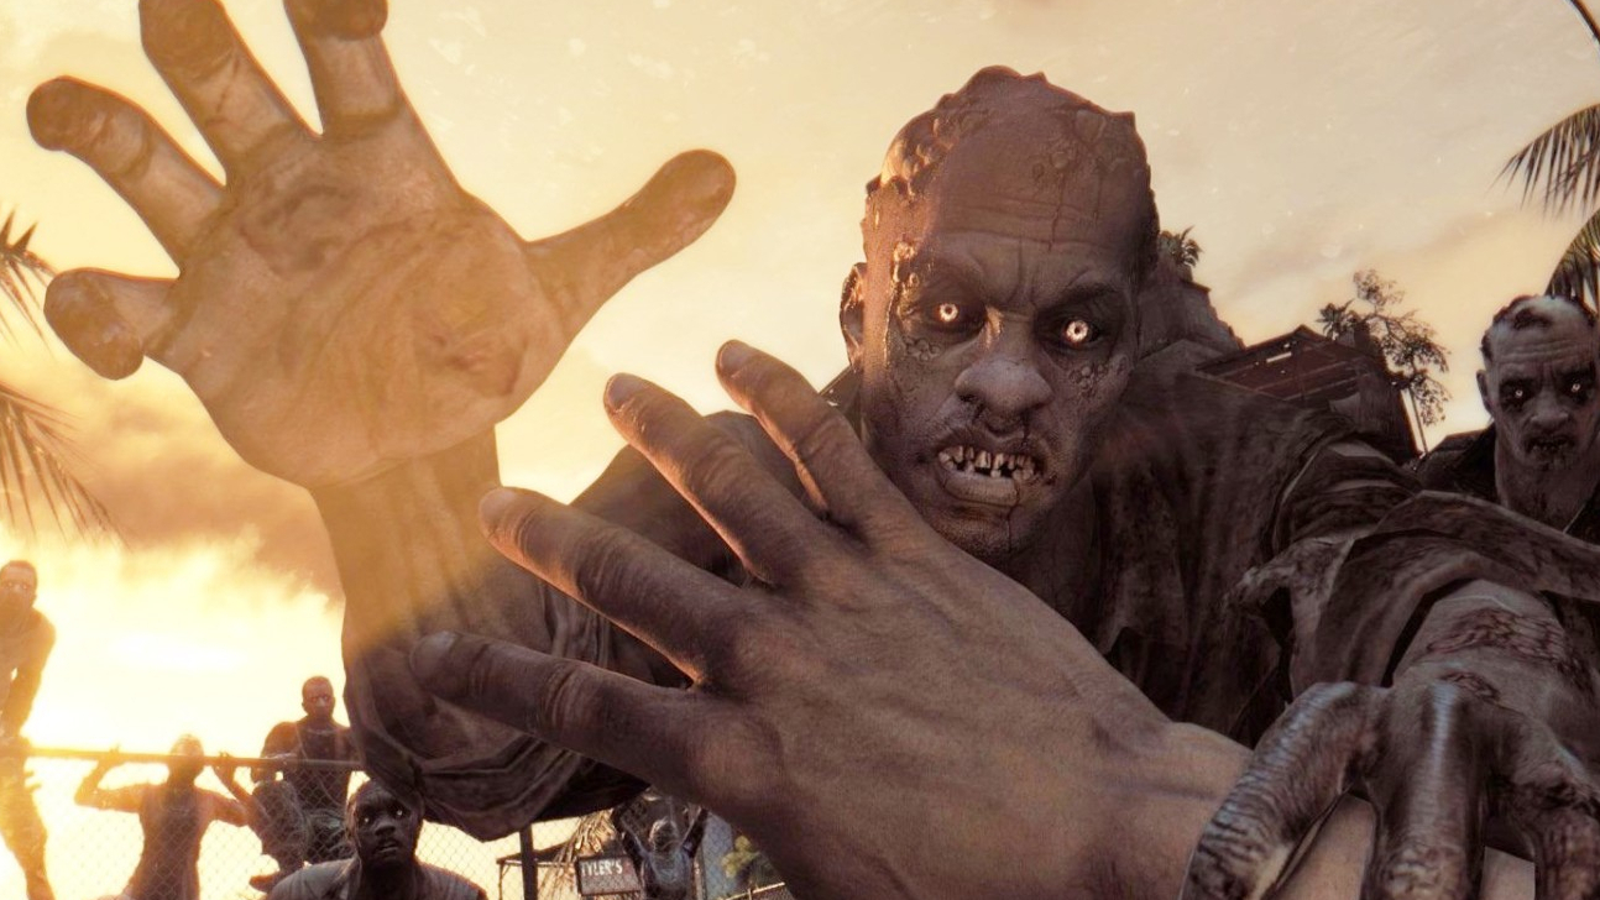 Dying Light 2 PlayStation 5 Performance And Resolution Modes